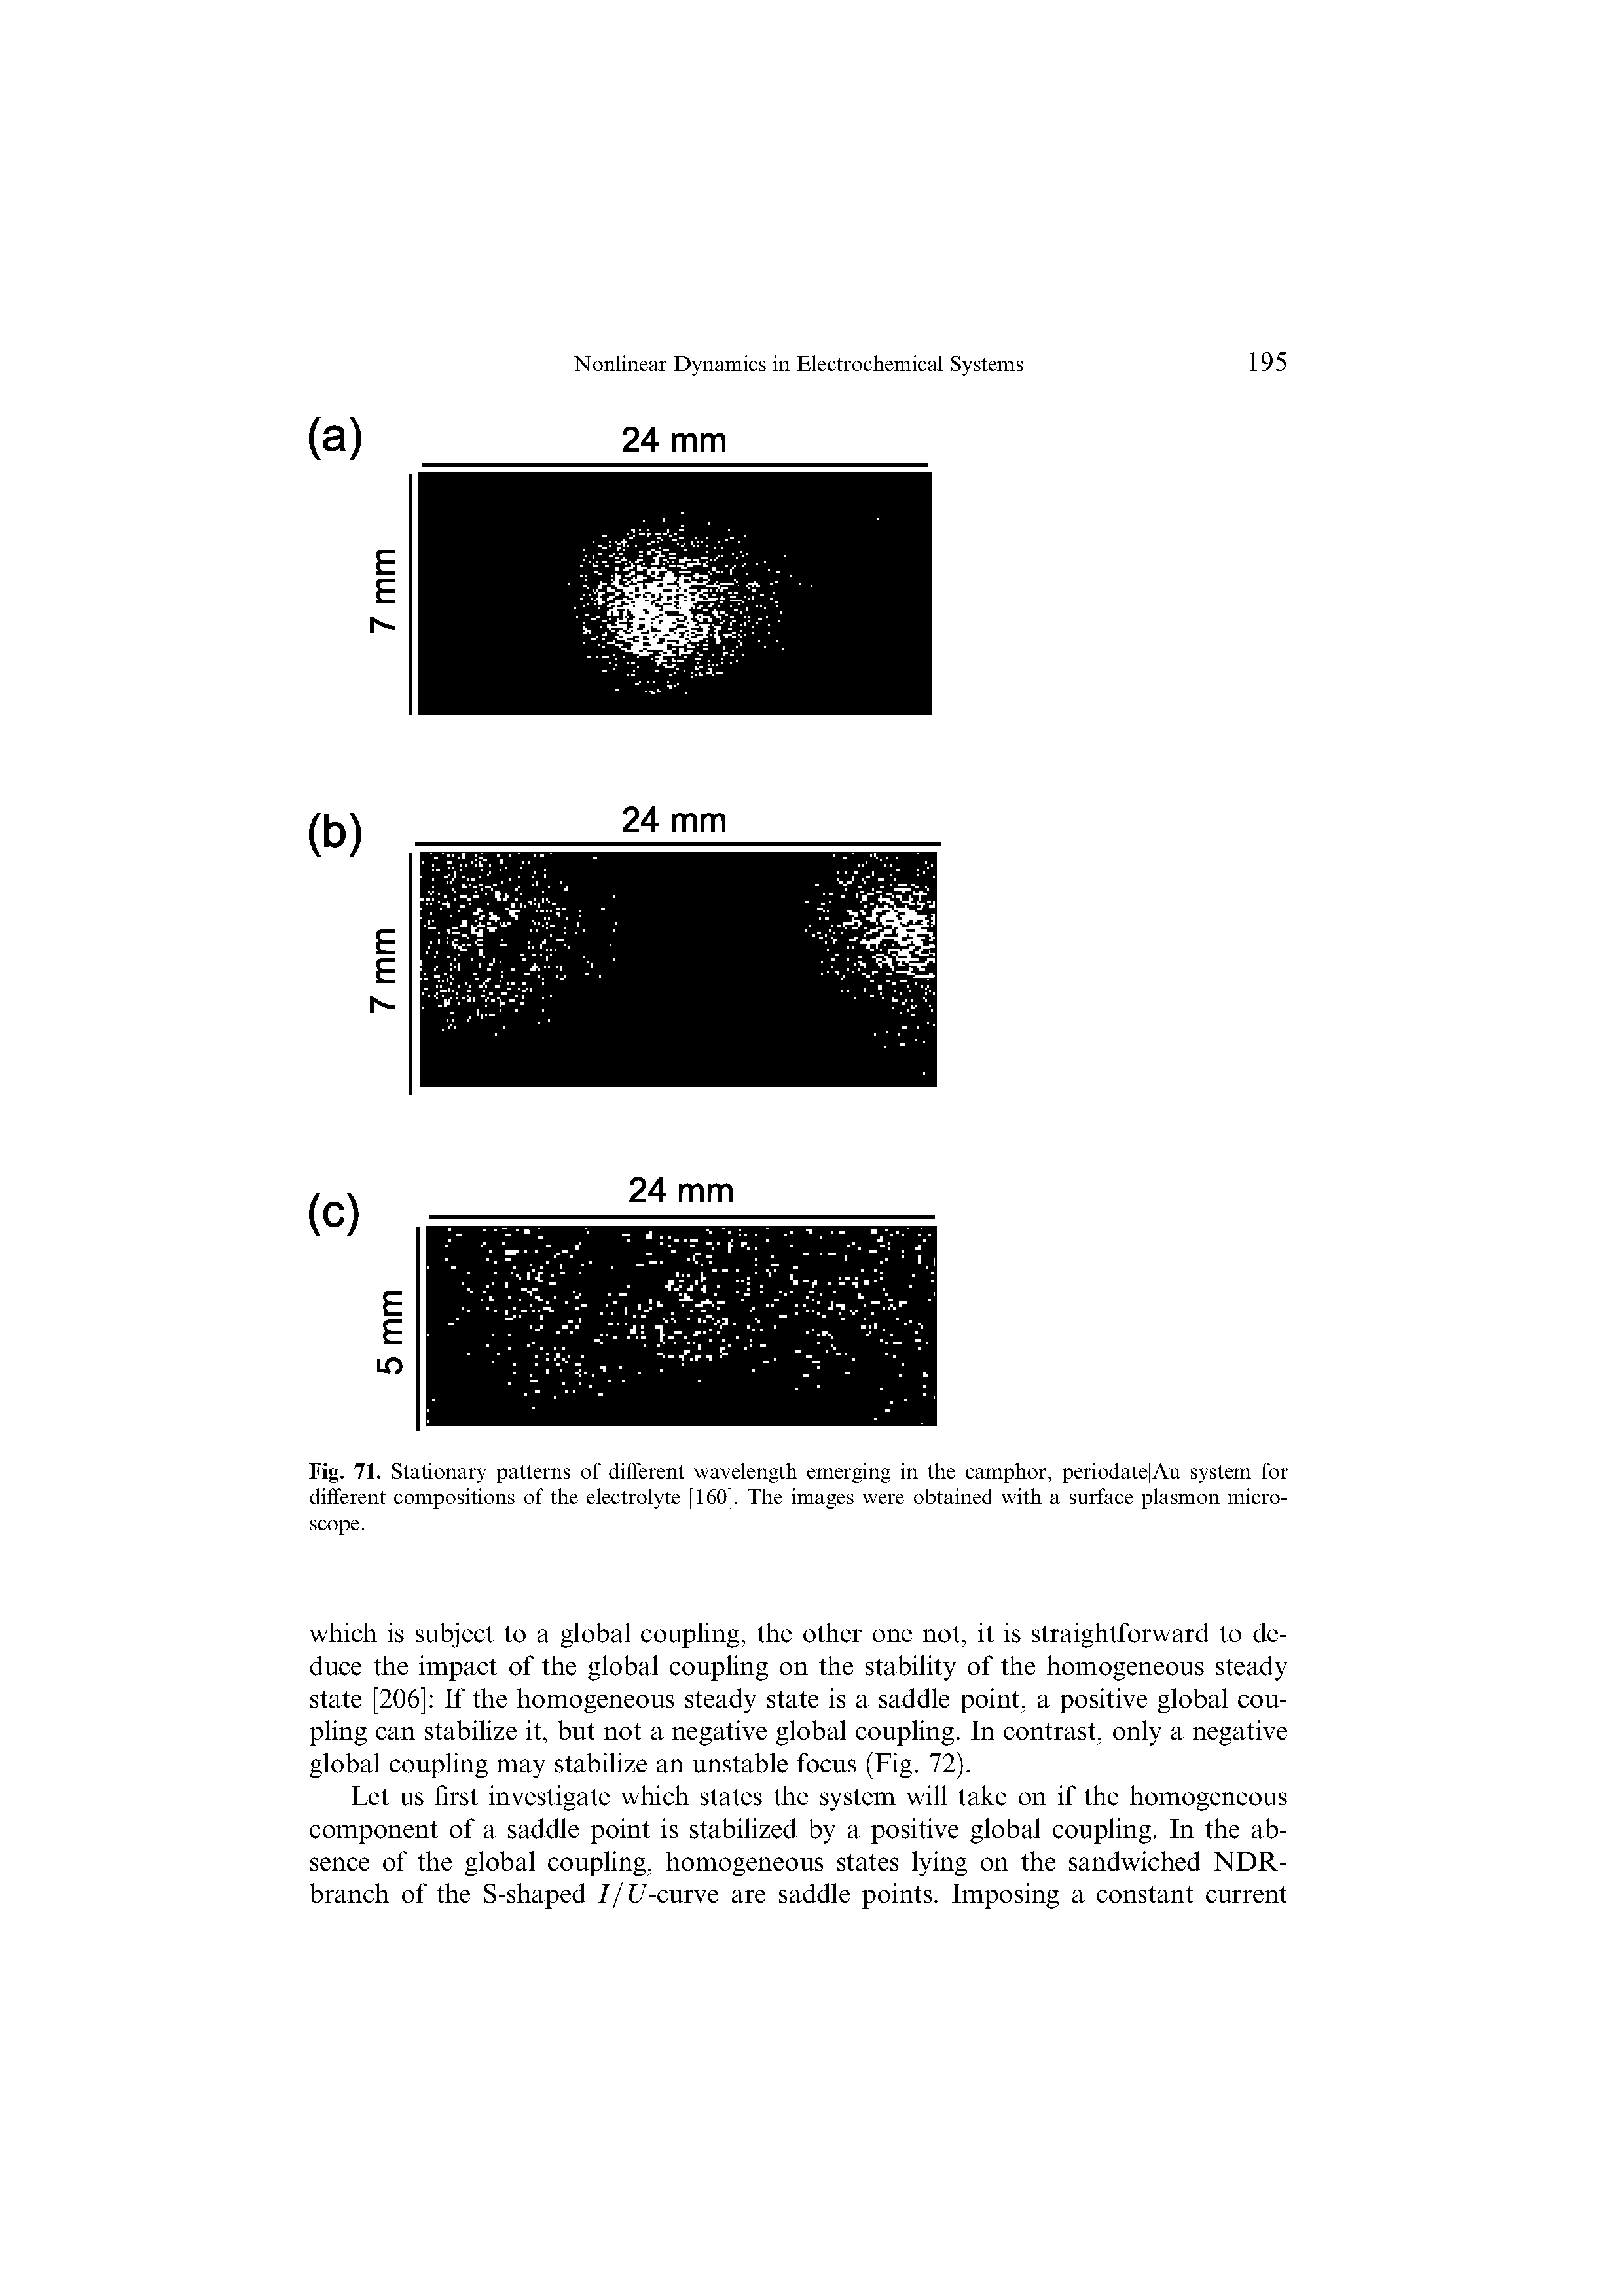 Fig. 71. Stationary patterns of different wavelength emerging in the camphor, periodate Au system for different compositions of the electrolyte [160], The images were obtained with a surface plasmon microscope.